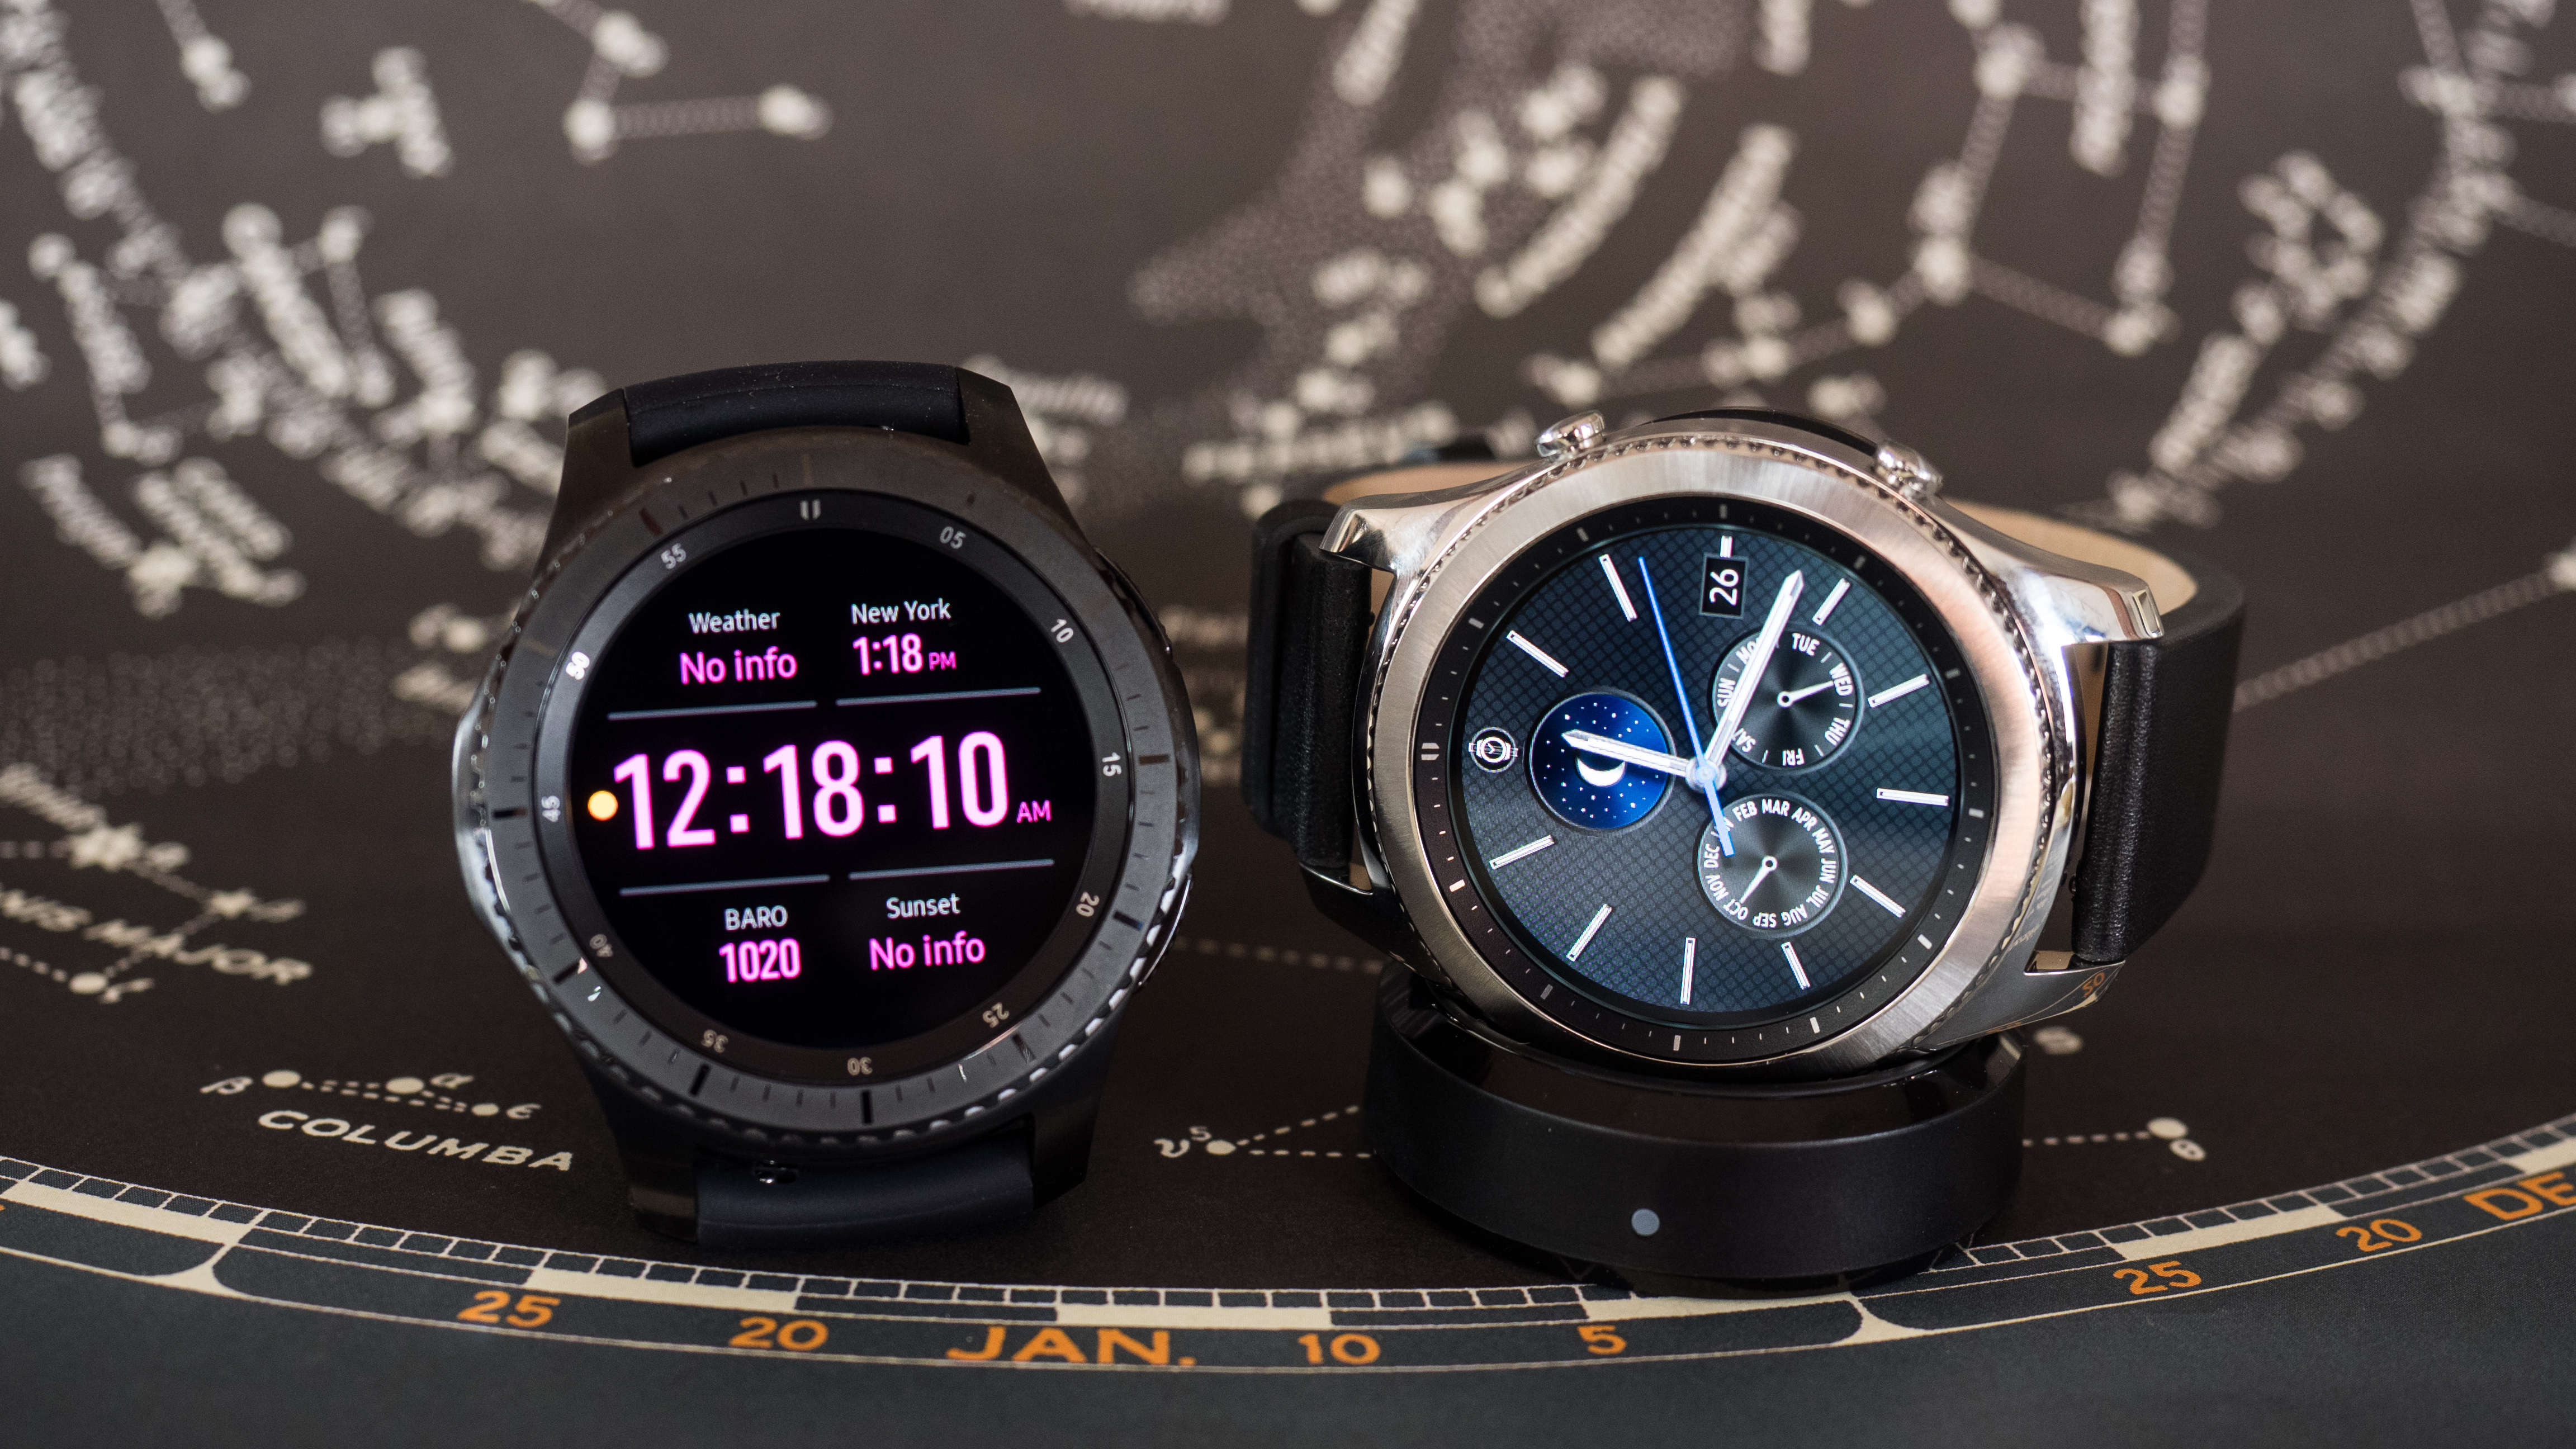 Hands-On: The Samsung Gear S3 Smartwatch Classic And Frontier